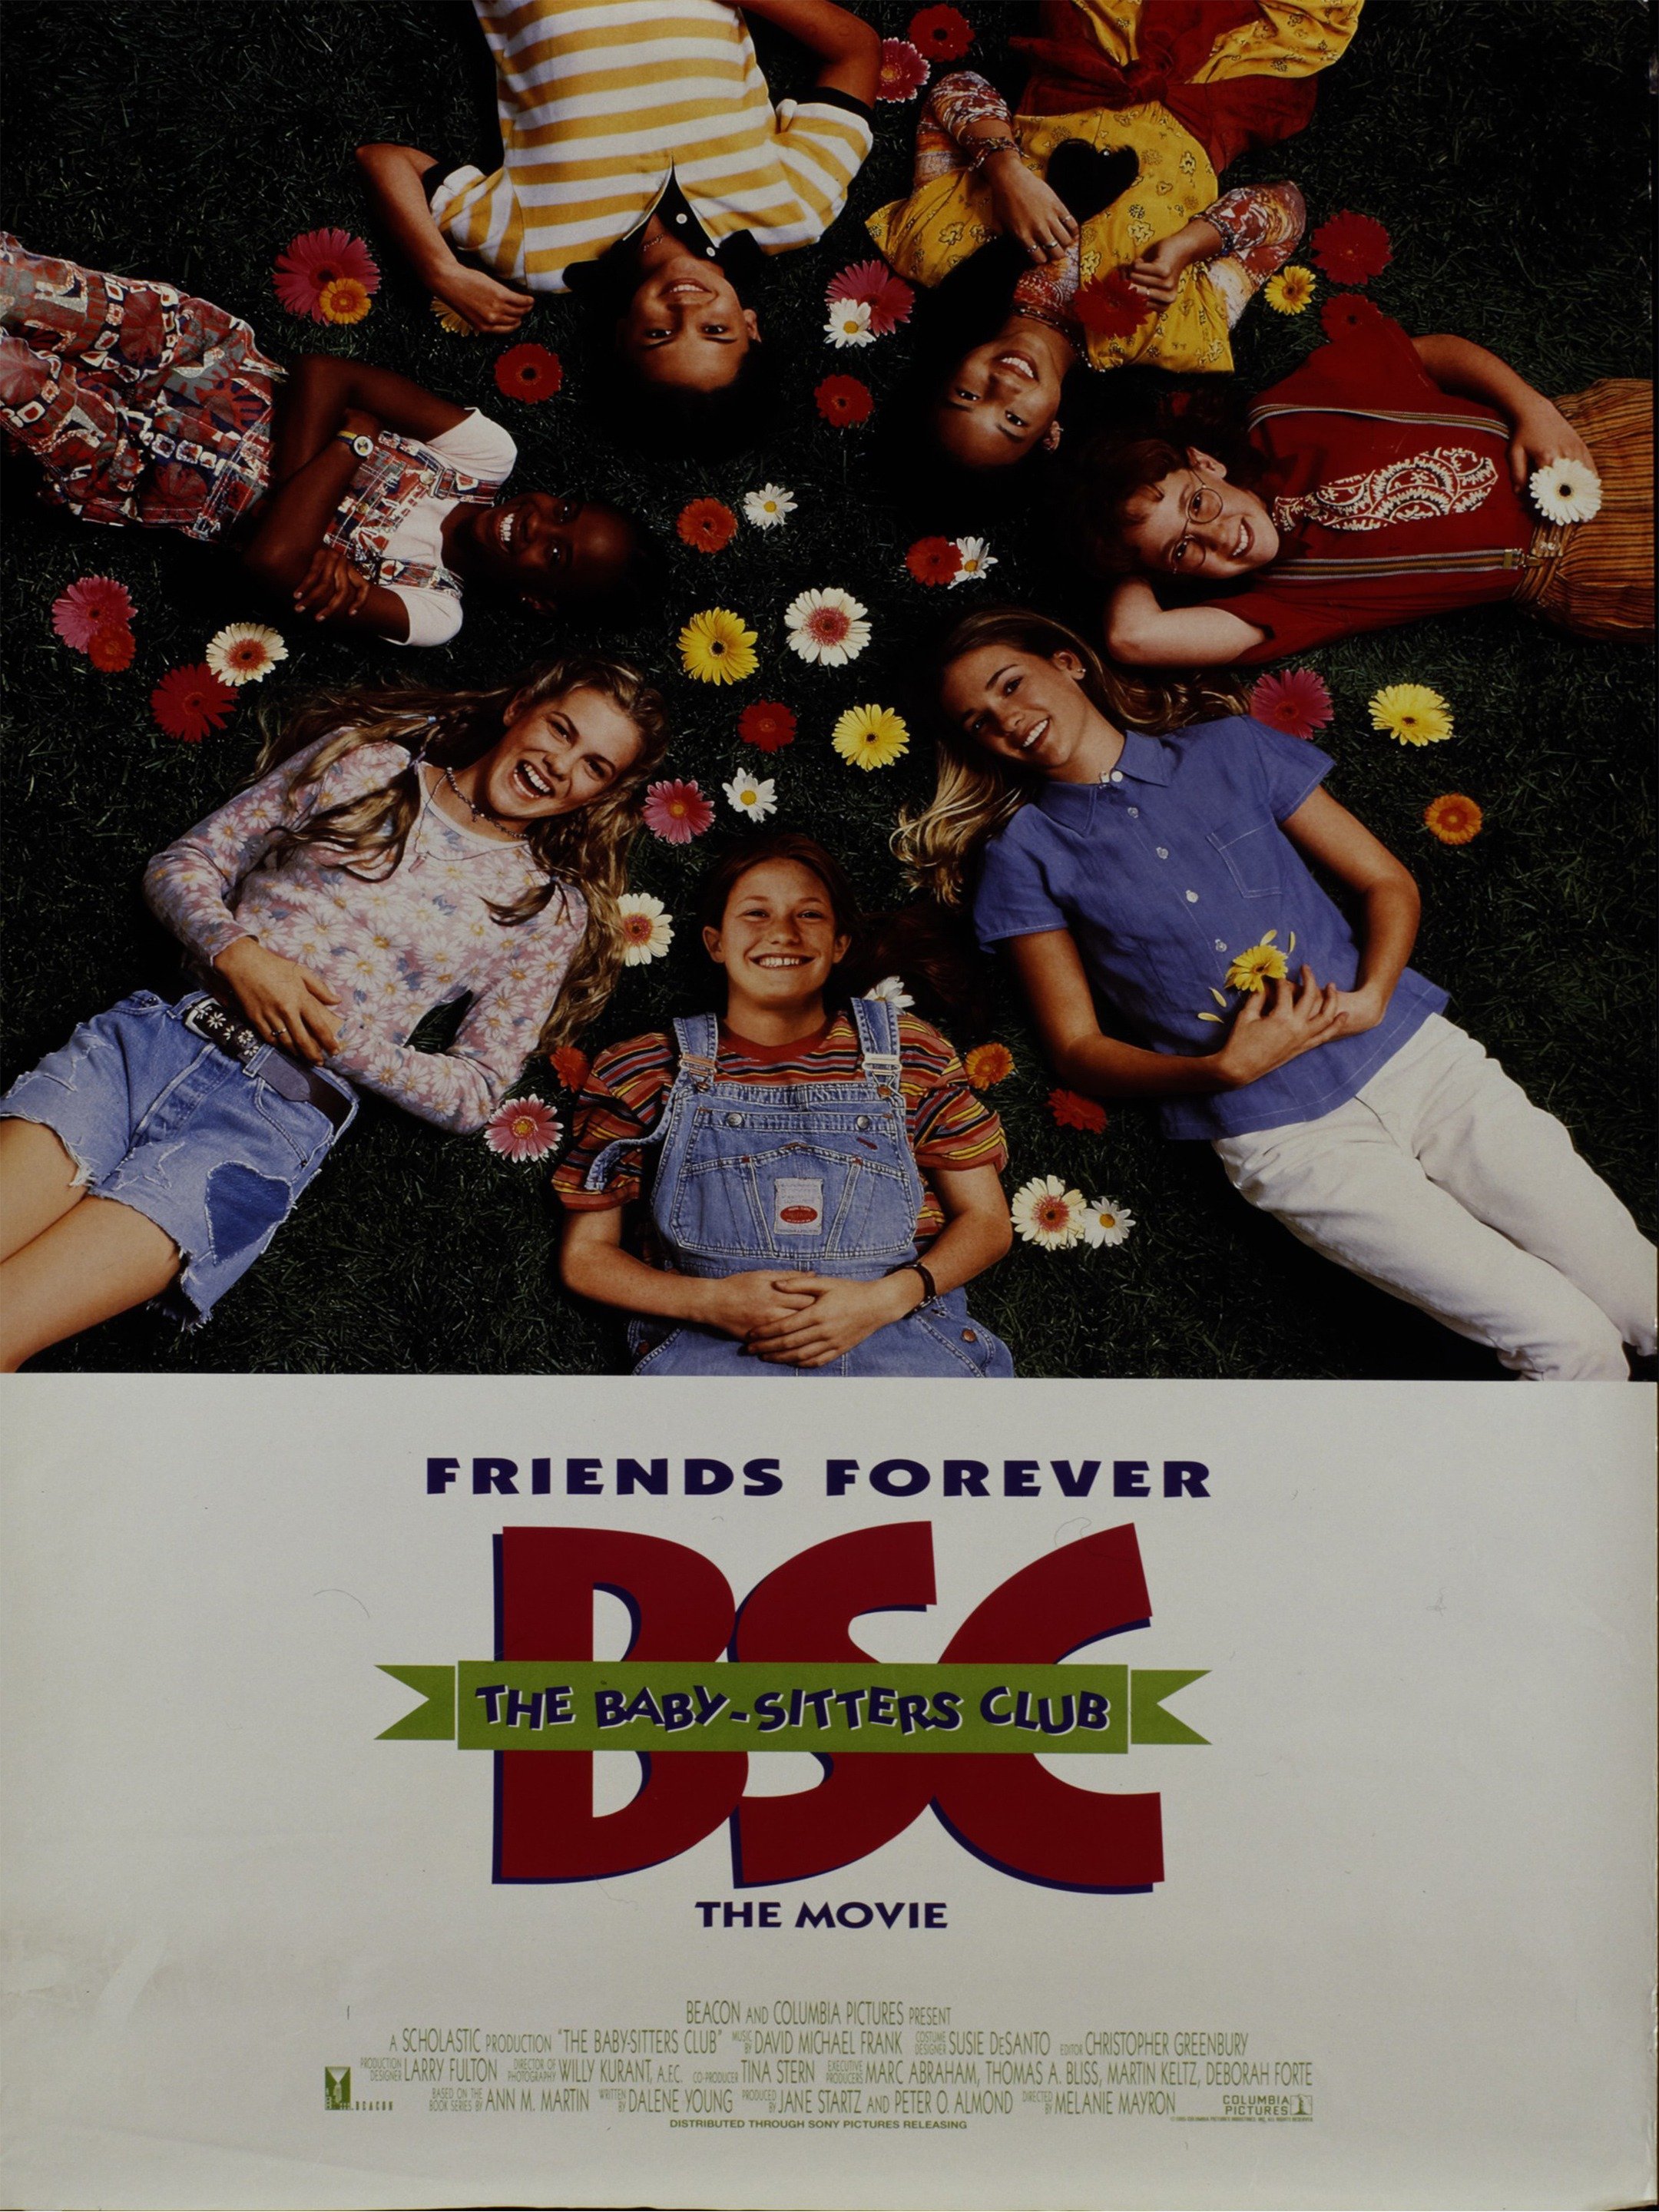 The Baby-Sitters Club photo image